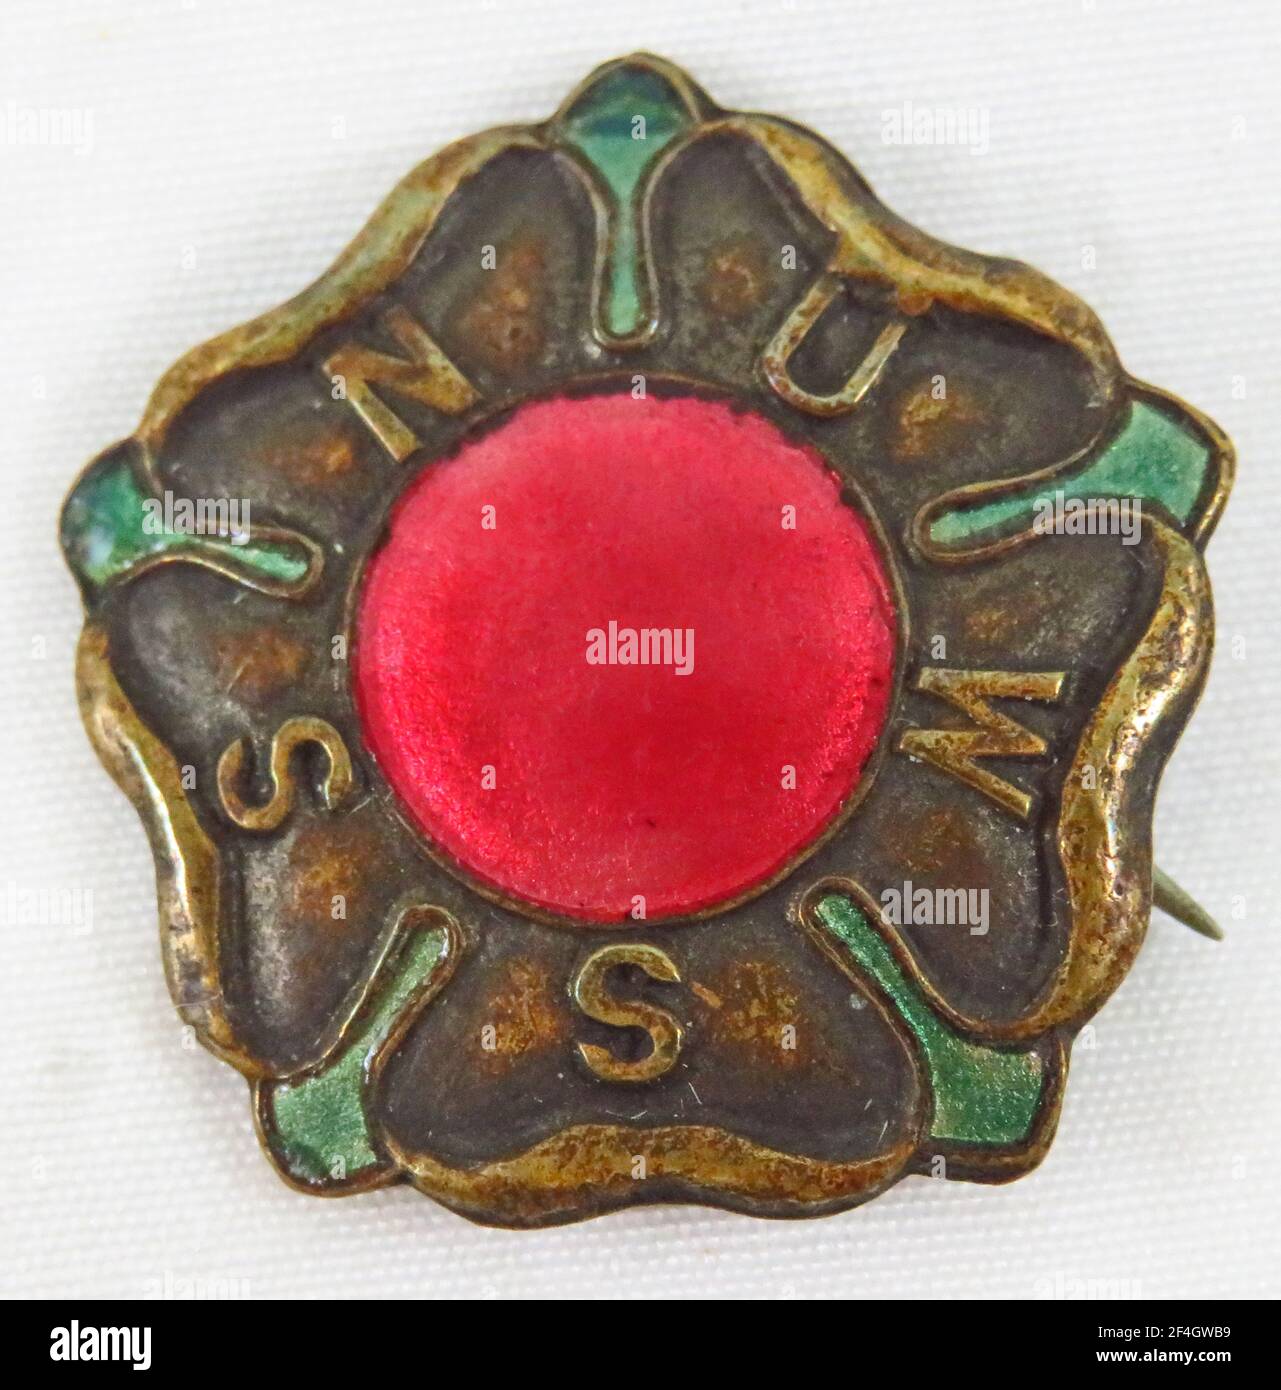 Red, green, and gold, enamel and metal pin or badge, with a stylized rose and the acronym 'NUWSS, ' issued by the National Union of Women Suffrage Societies (NUWSS), for the British market, 1900. Photography by Emilia van Beugen. () Stock Photo